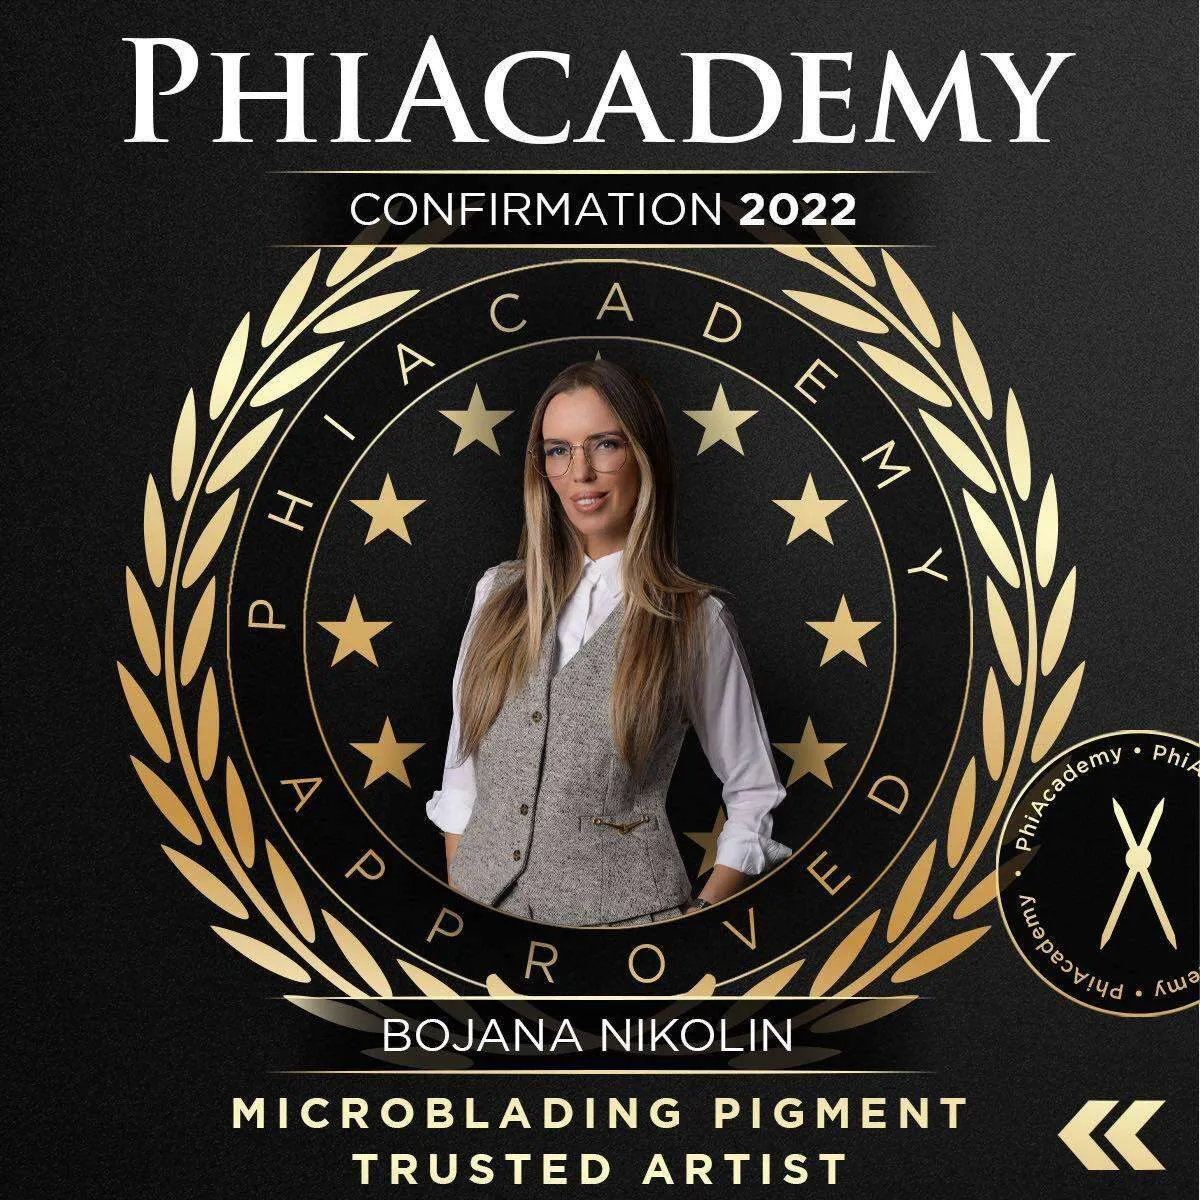 PhiAcademy confirmation microblading pigment trusted artist